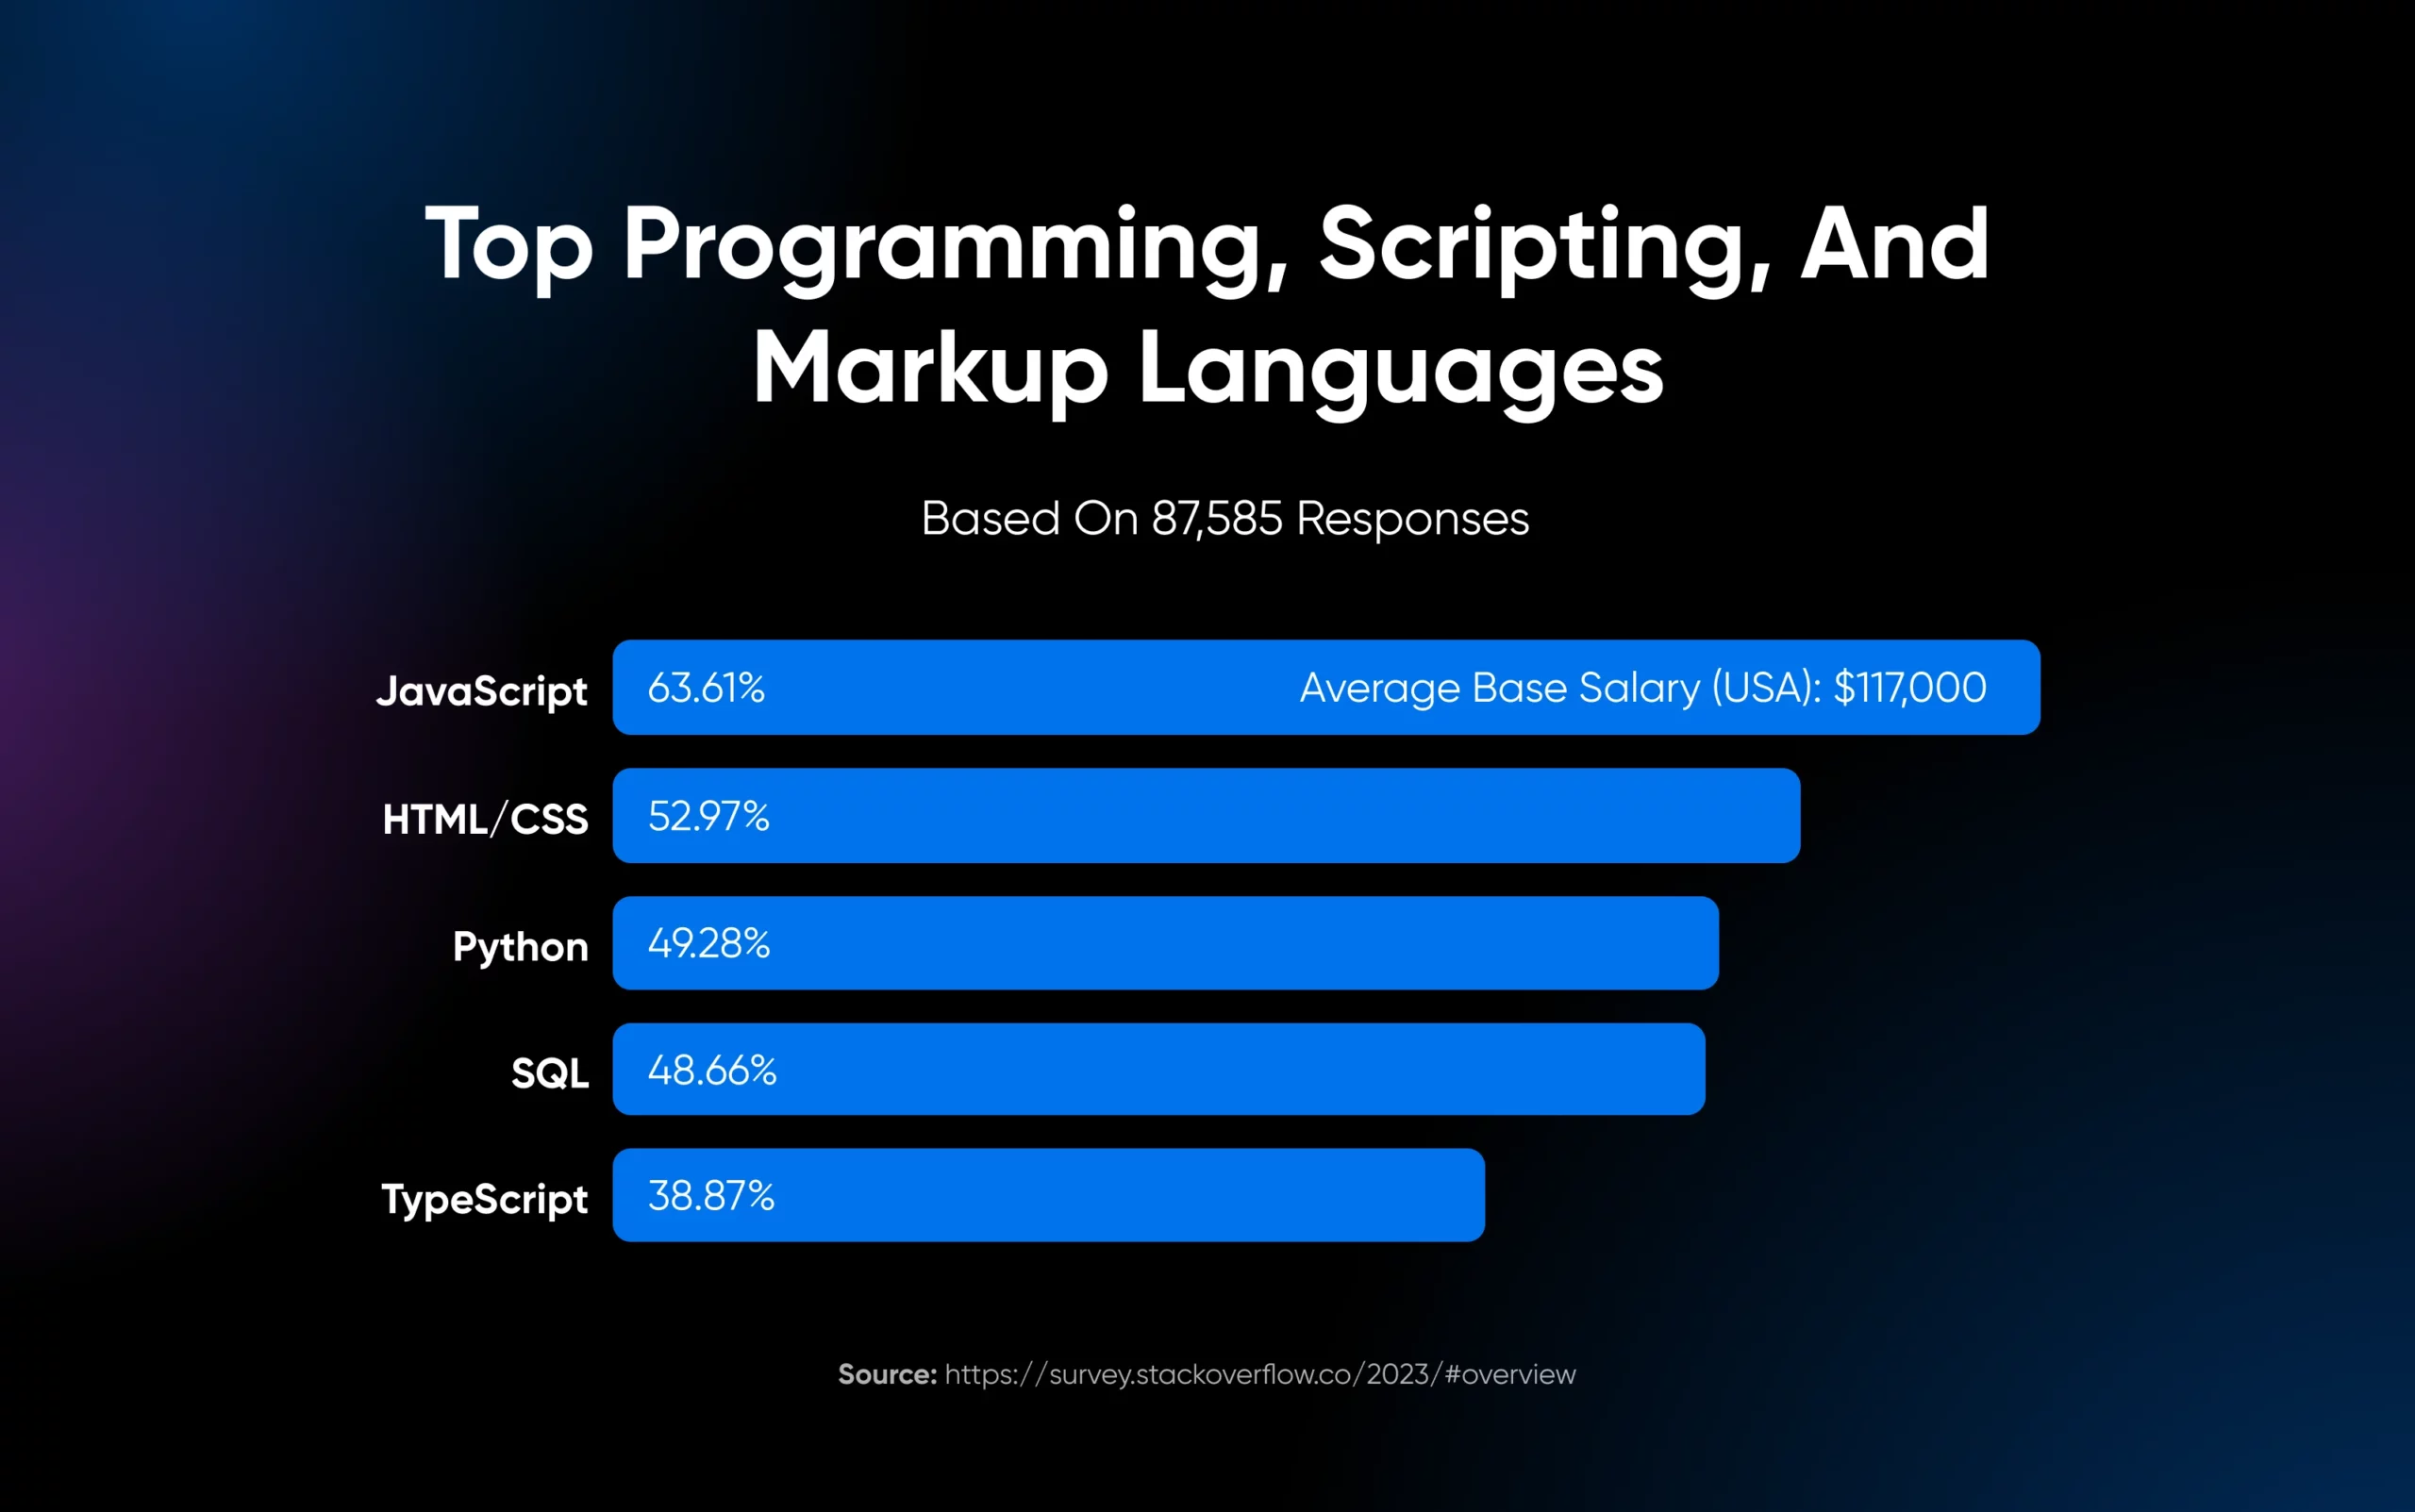 Bar chart of the top programming, scripting, and markup languages with JavaScript at 63.61% based on over 85k responses. 